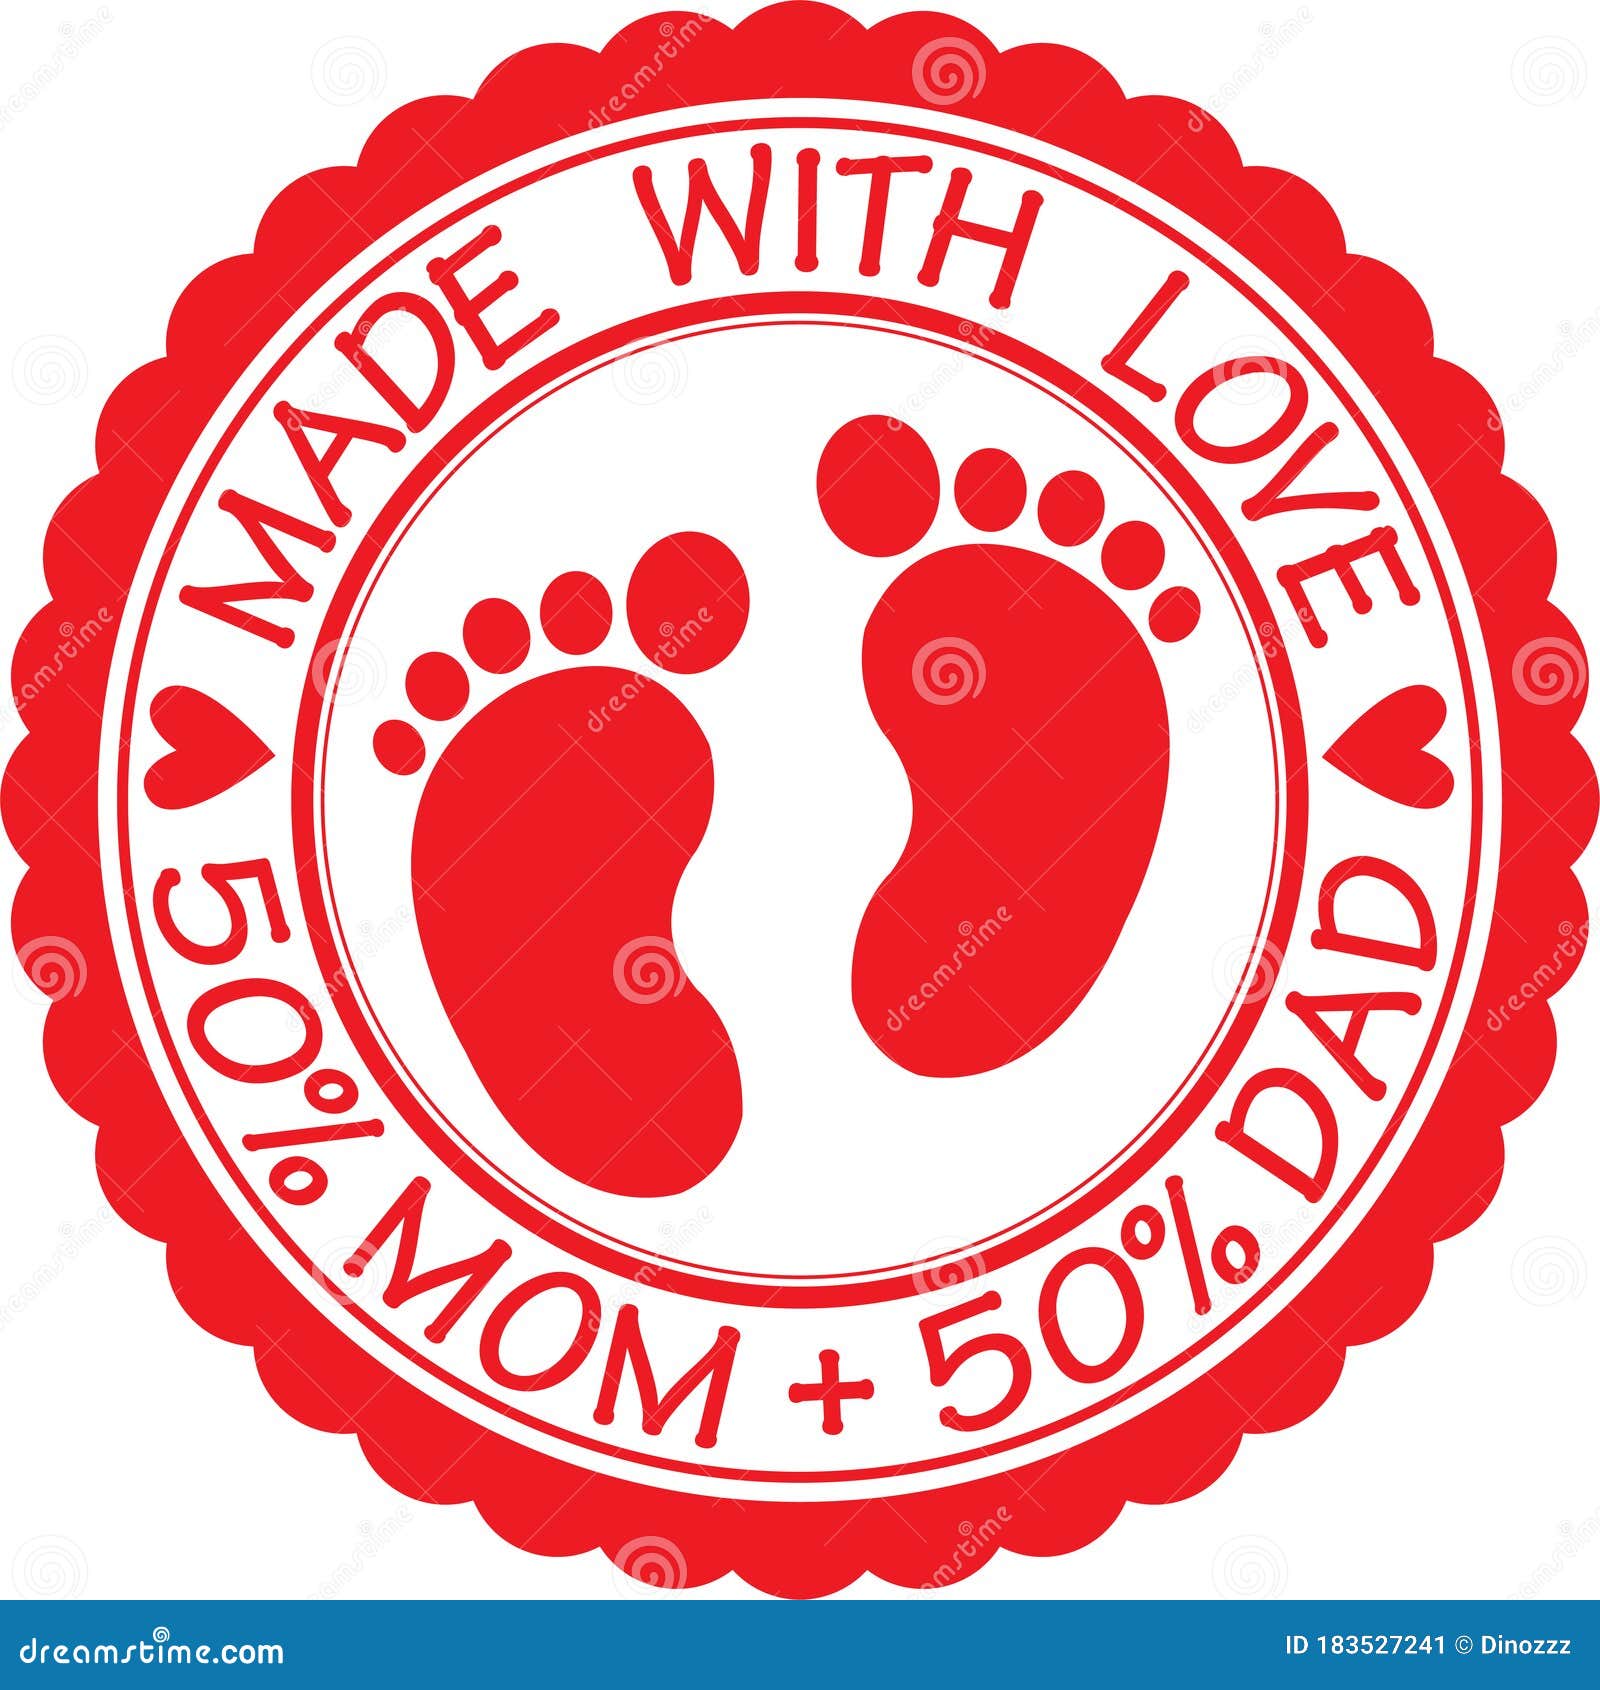 made with love sign with baby footprint, 50% mom + 50% dad, 